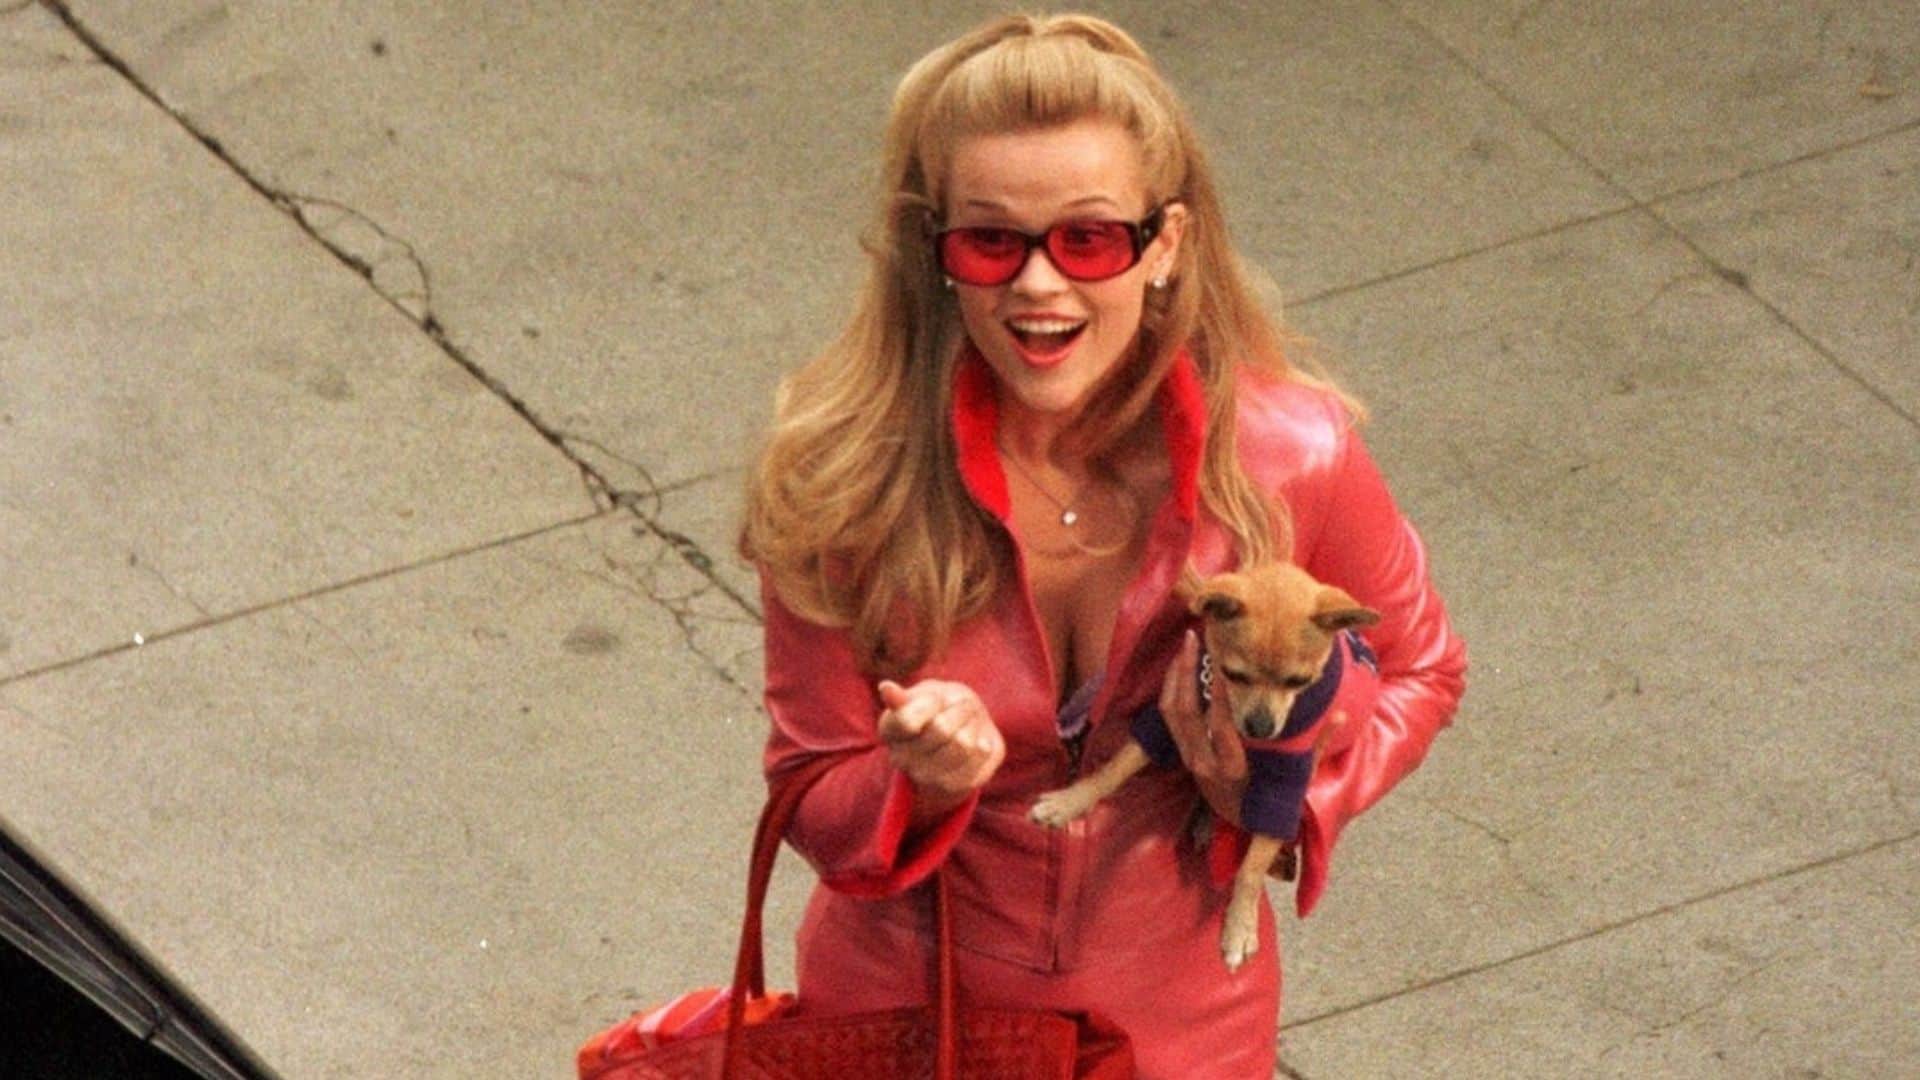 Reese Witherspoon holds a dog in this image from Metro-Goldwyn-Mayer.